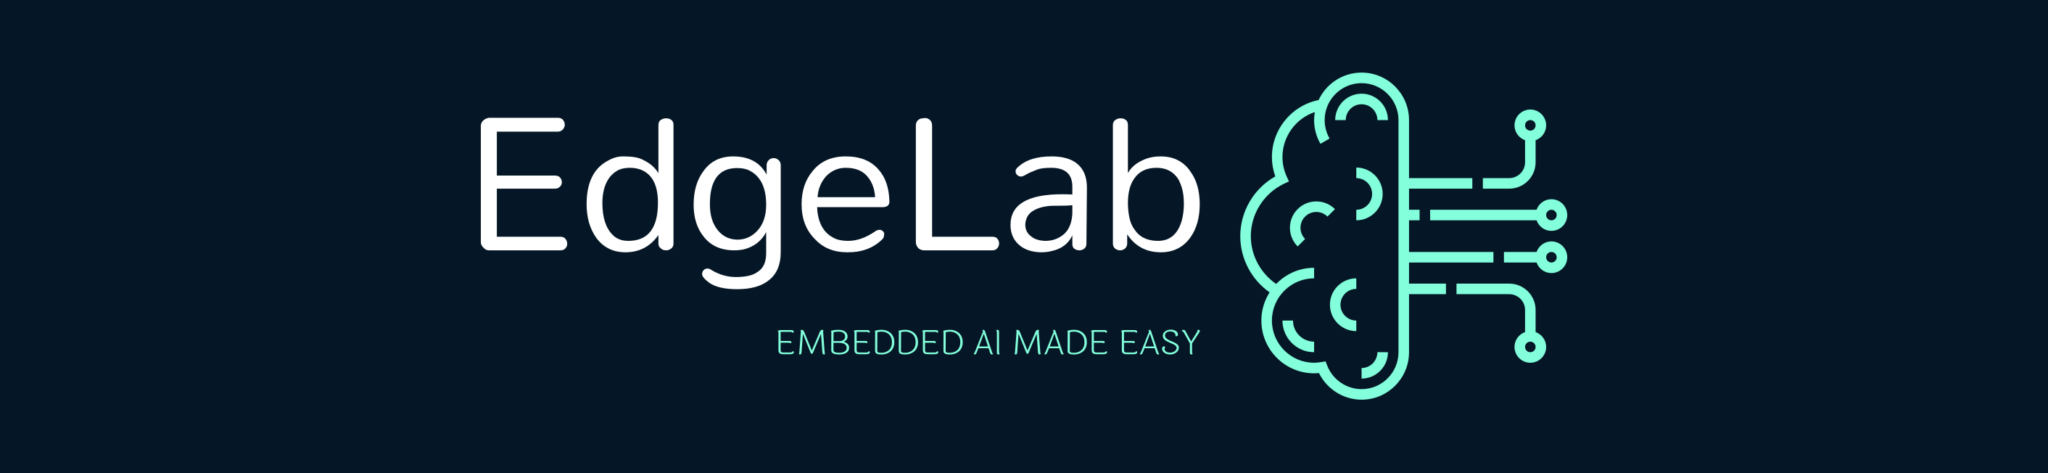 Edgelab: Experience AI at the Edge With Only $10 Hardware